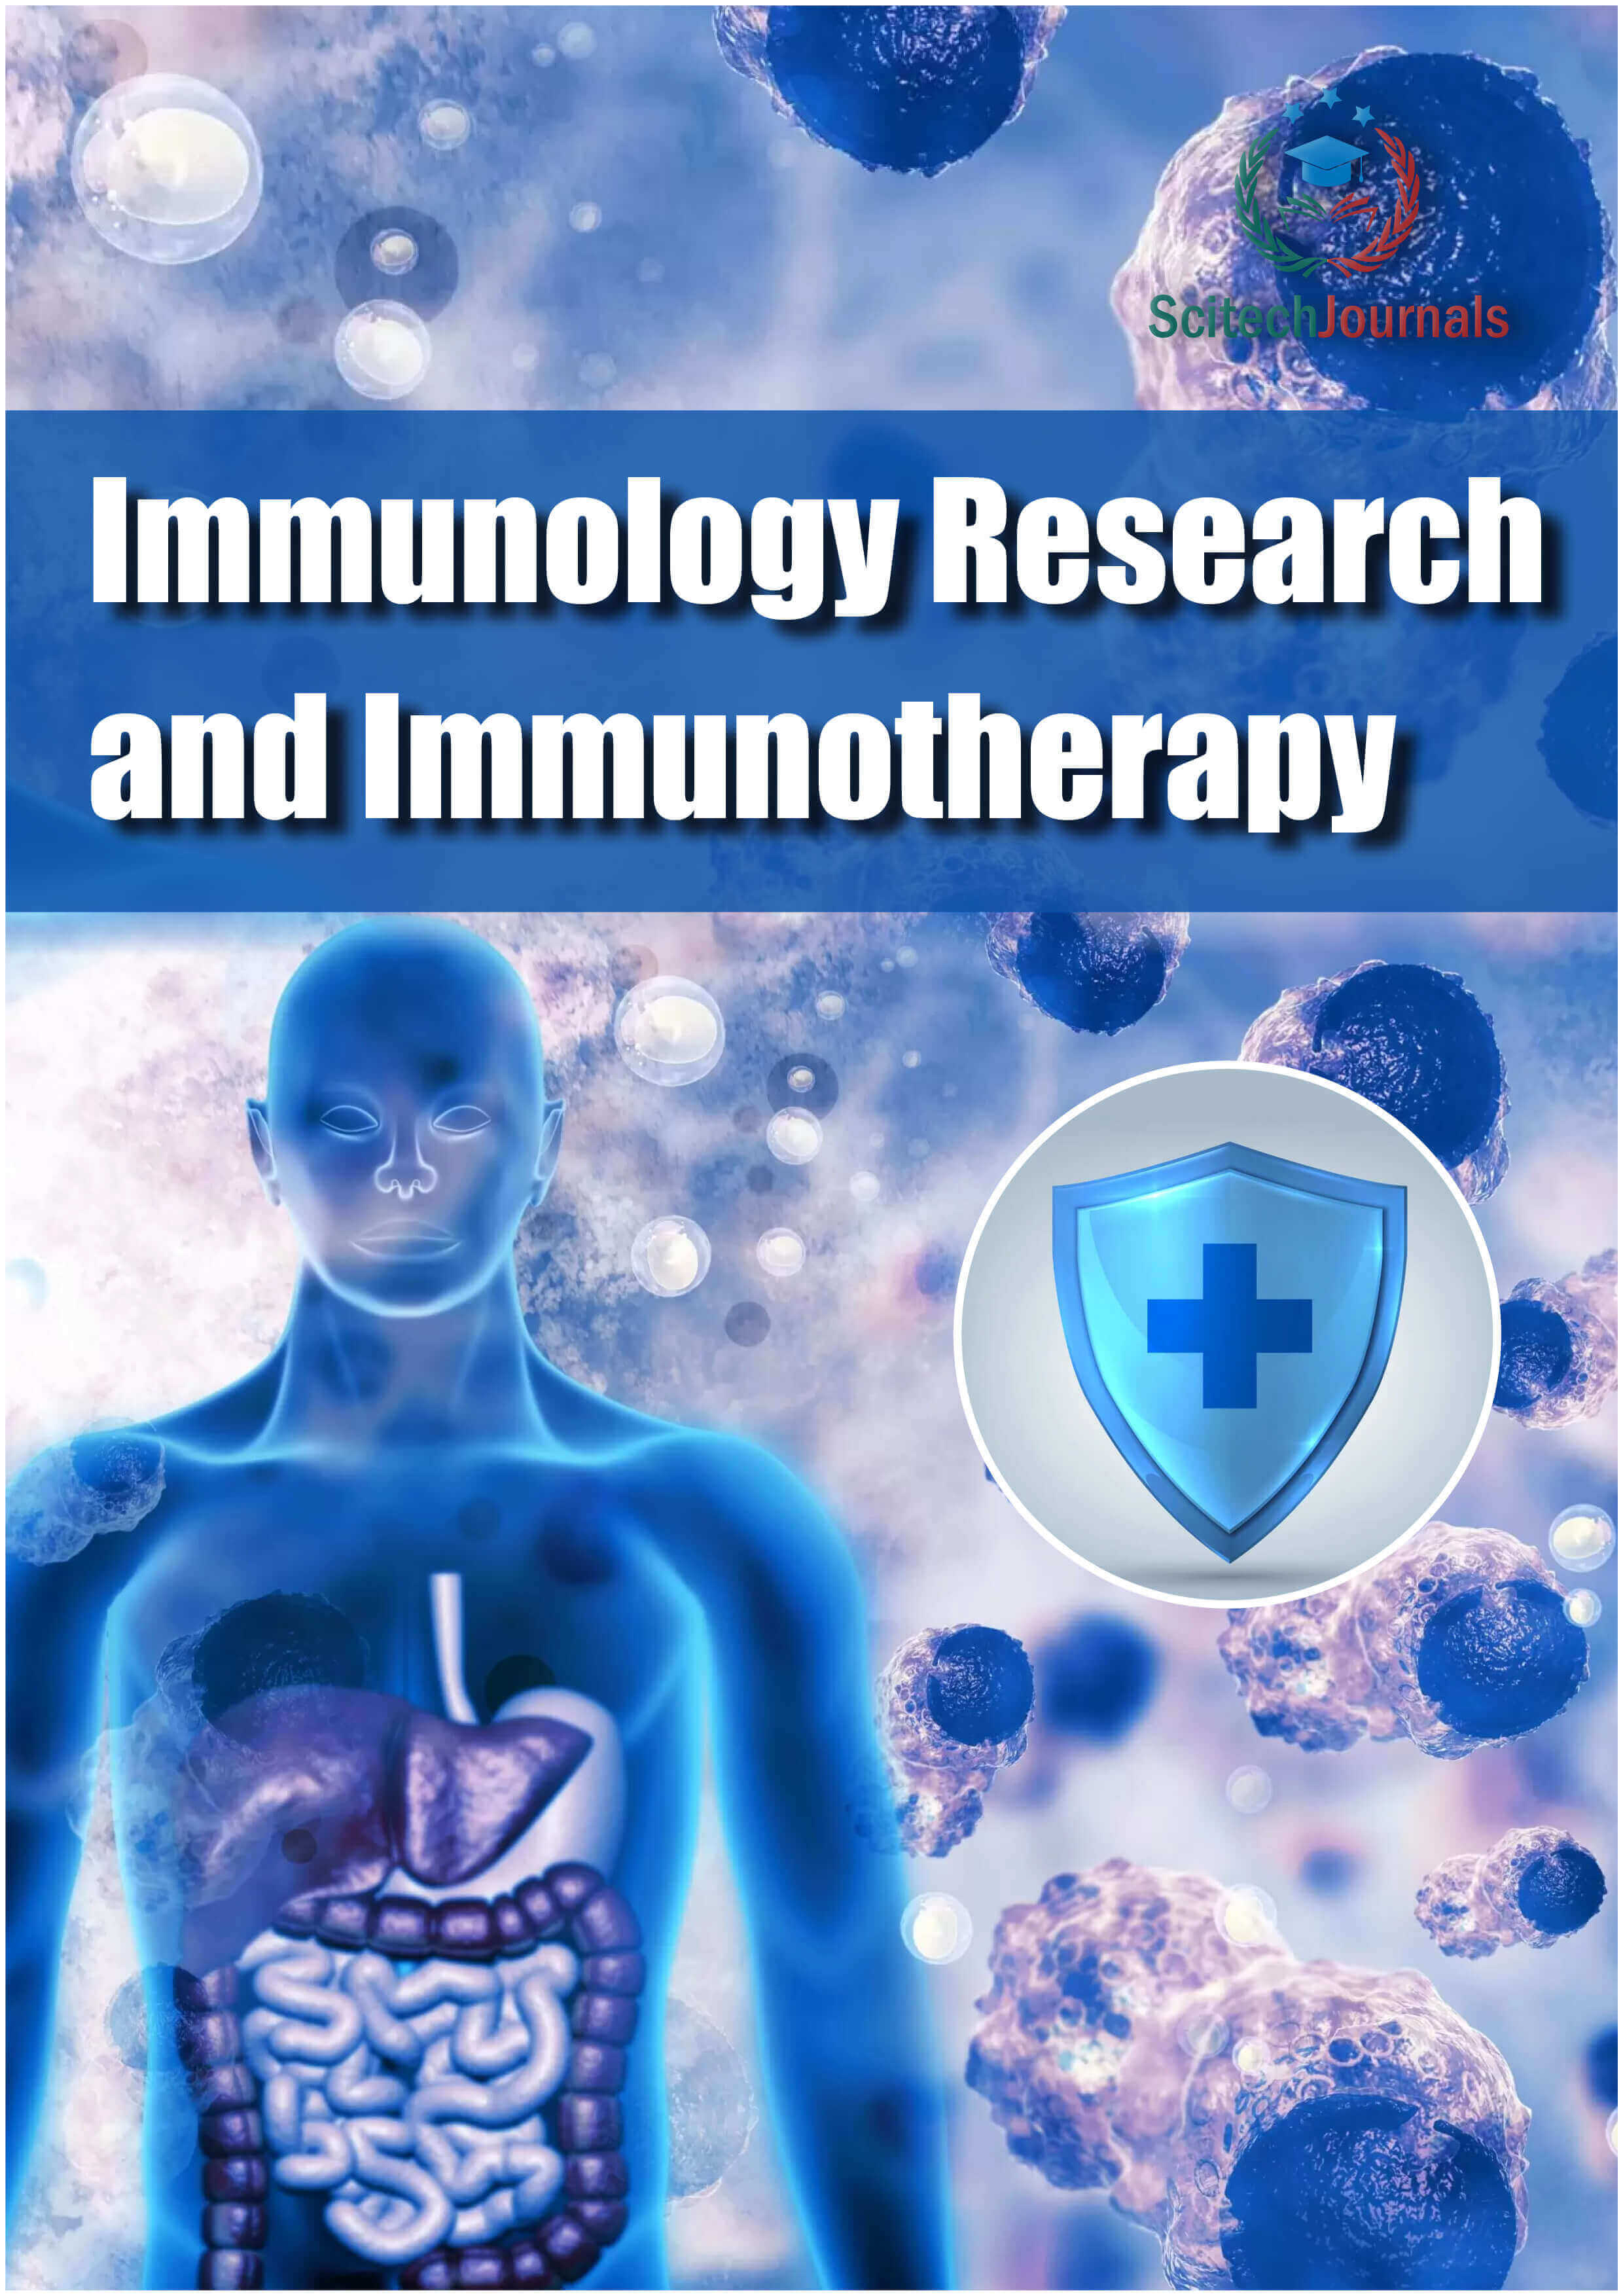 Immunology Research and Immunotherapy